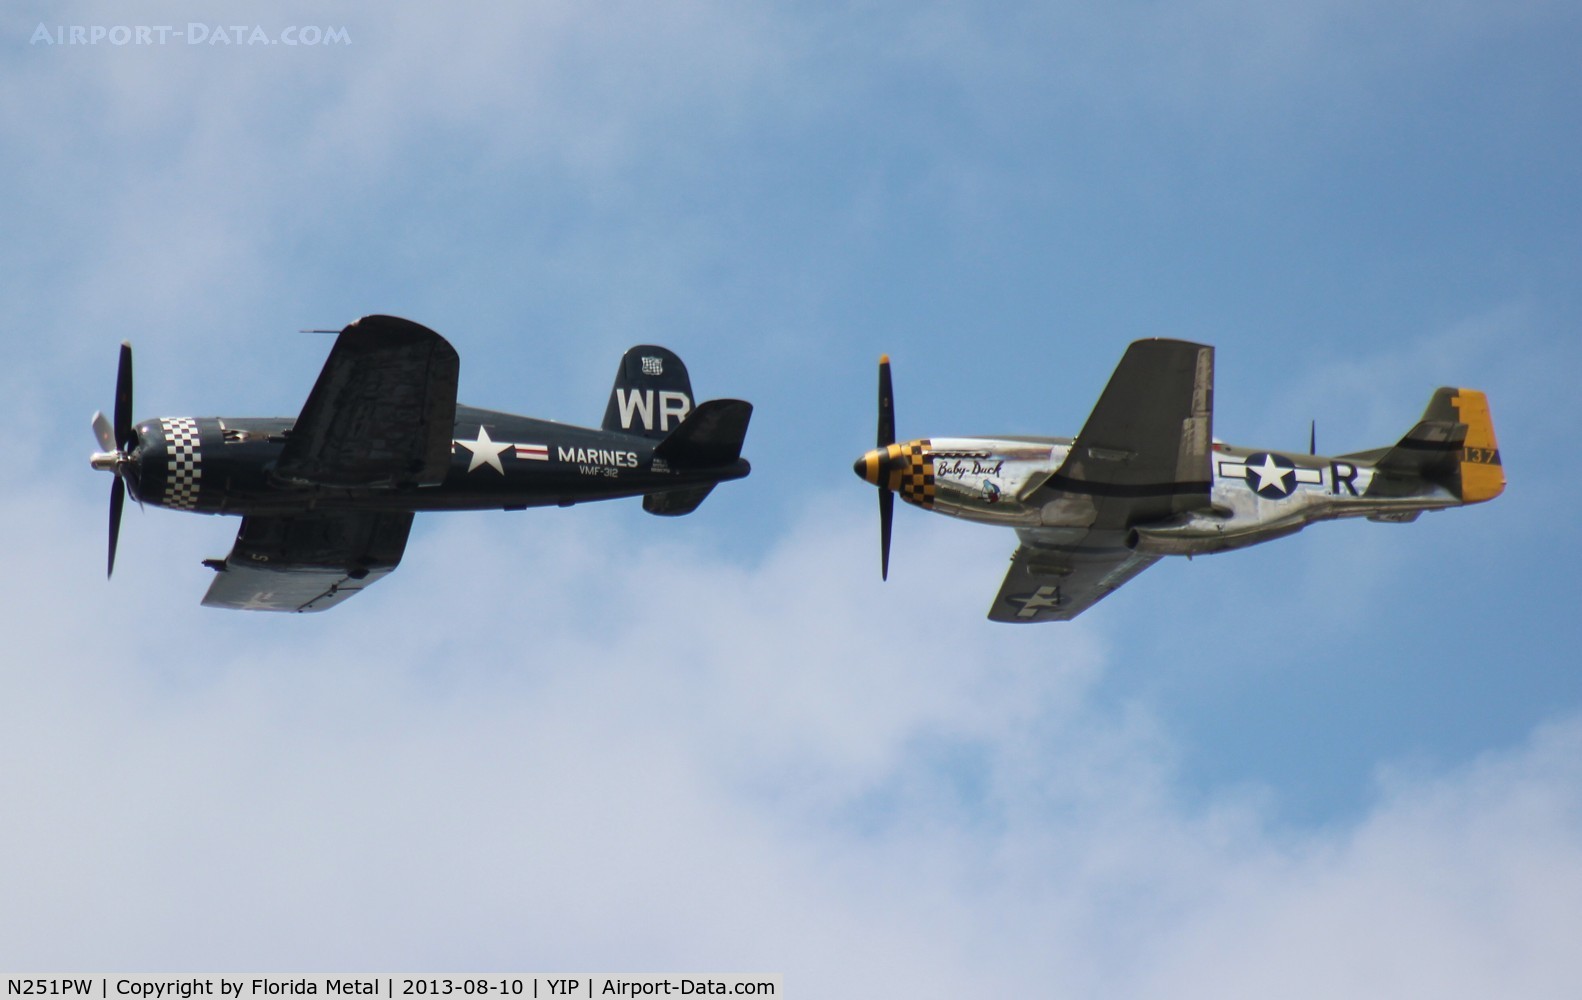 N251PW, 1944 North American P-51D Mustang C/N 122-31945, Baby Duck with a Corsair